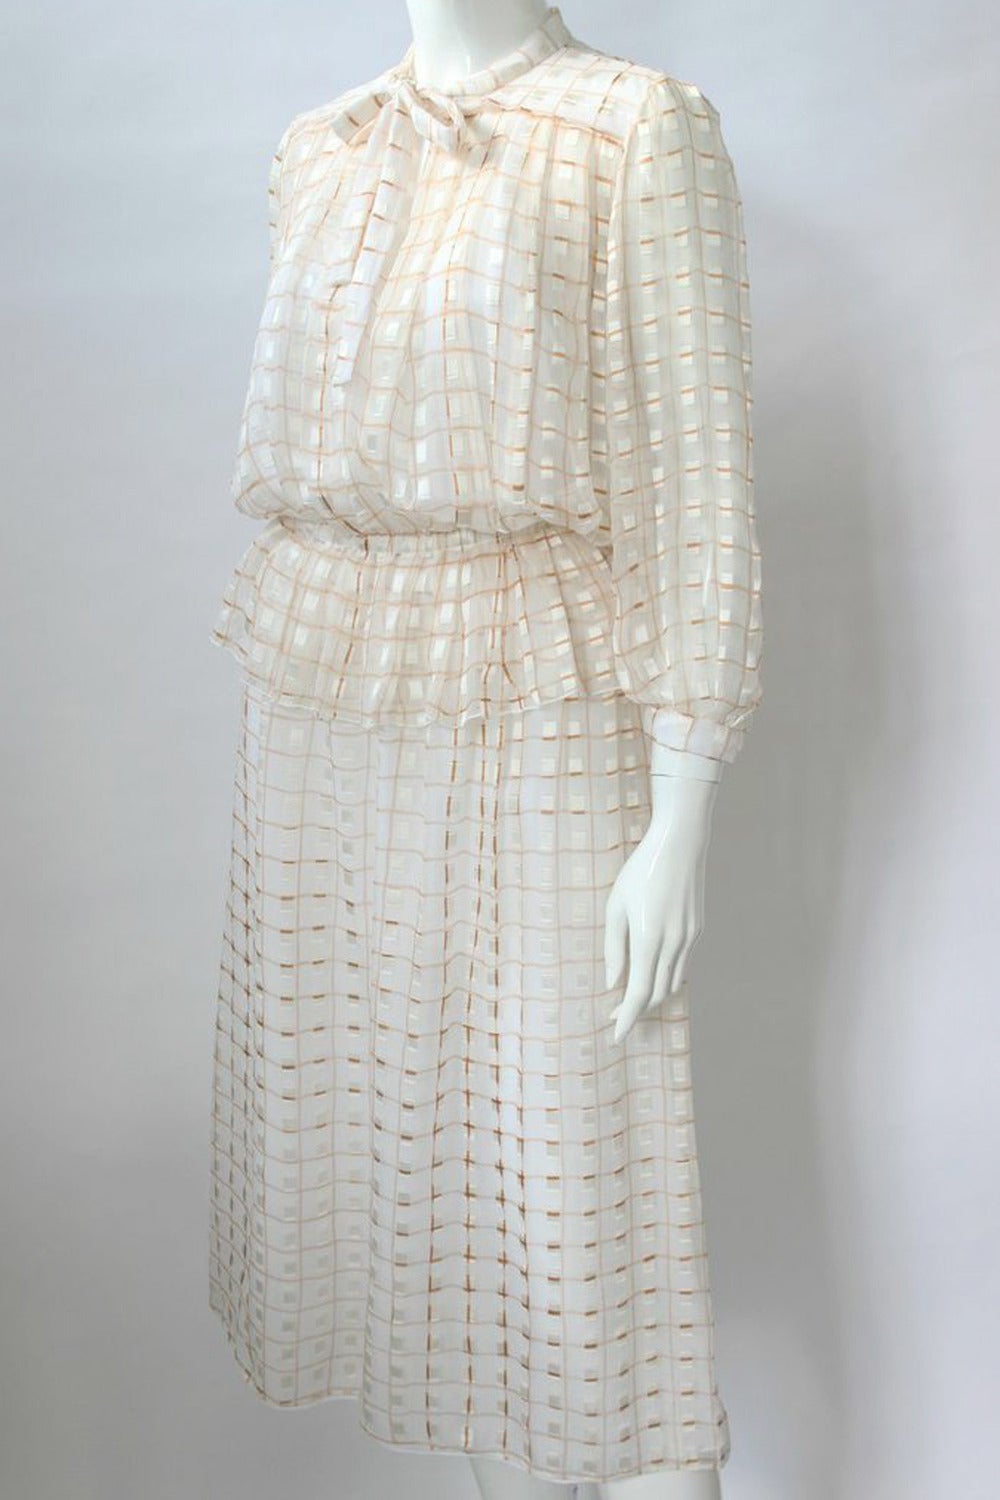 Courreges Paris 1970s Tan and Cream Silk Skirt & Top Ensemble 
Tan and cream stripe silk two piece vintage skirt and blouse set. Blouson pleated shoulder top has full cropped sleeves, keyhole opening with button and tie at the neck and a gathered